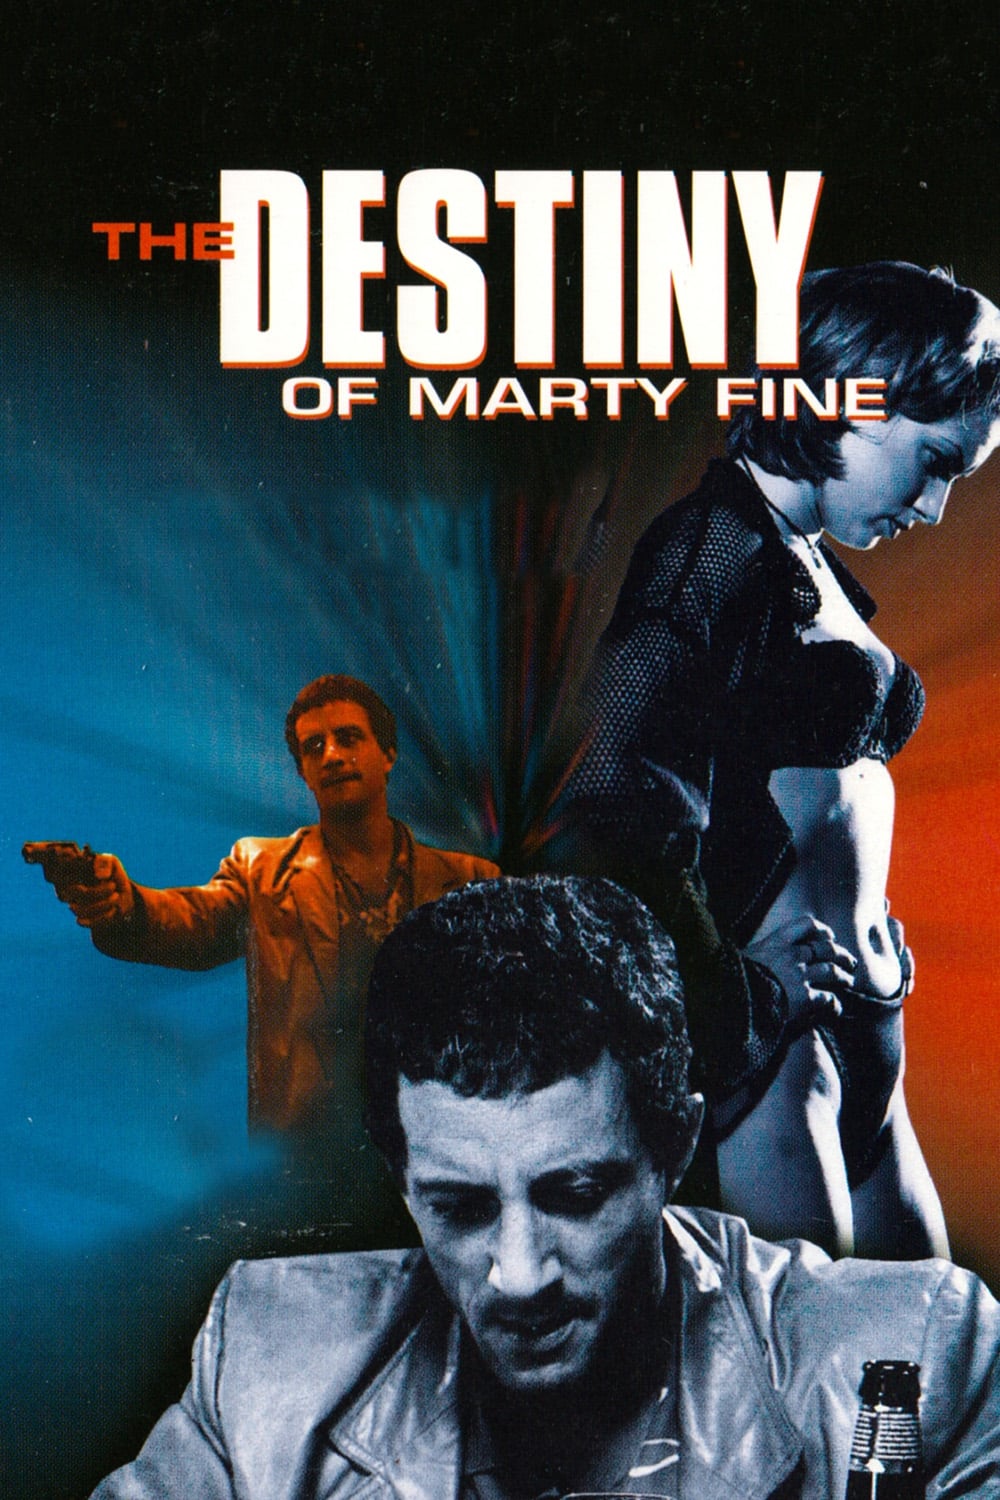 Marty Fine